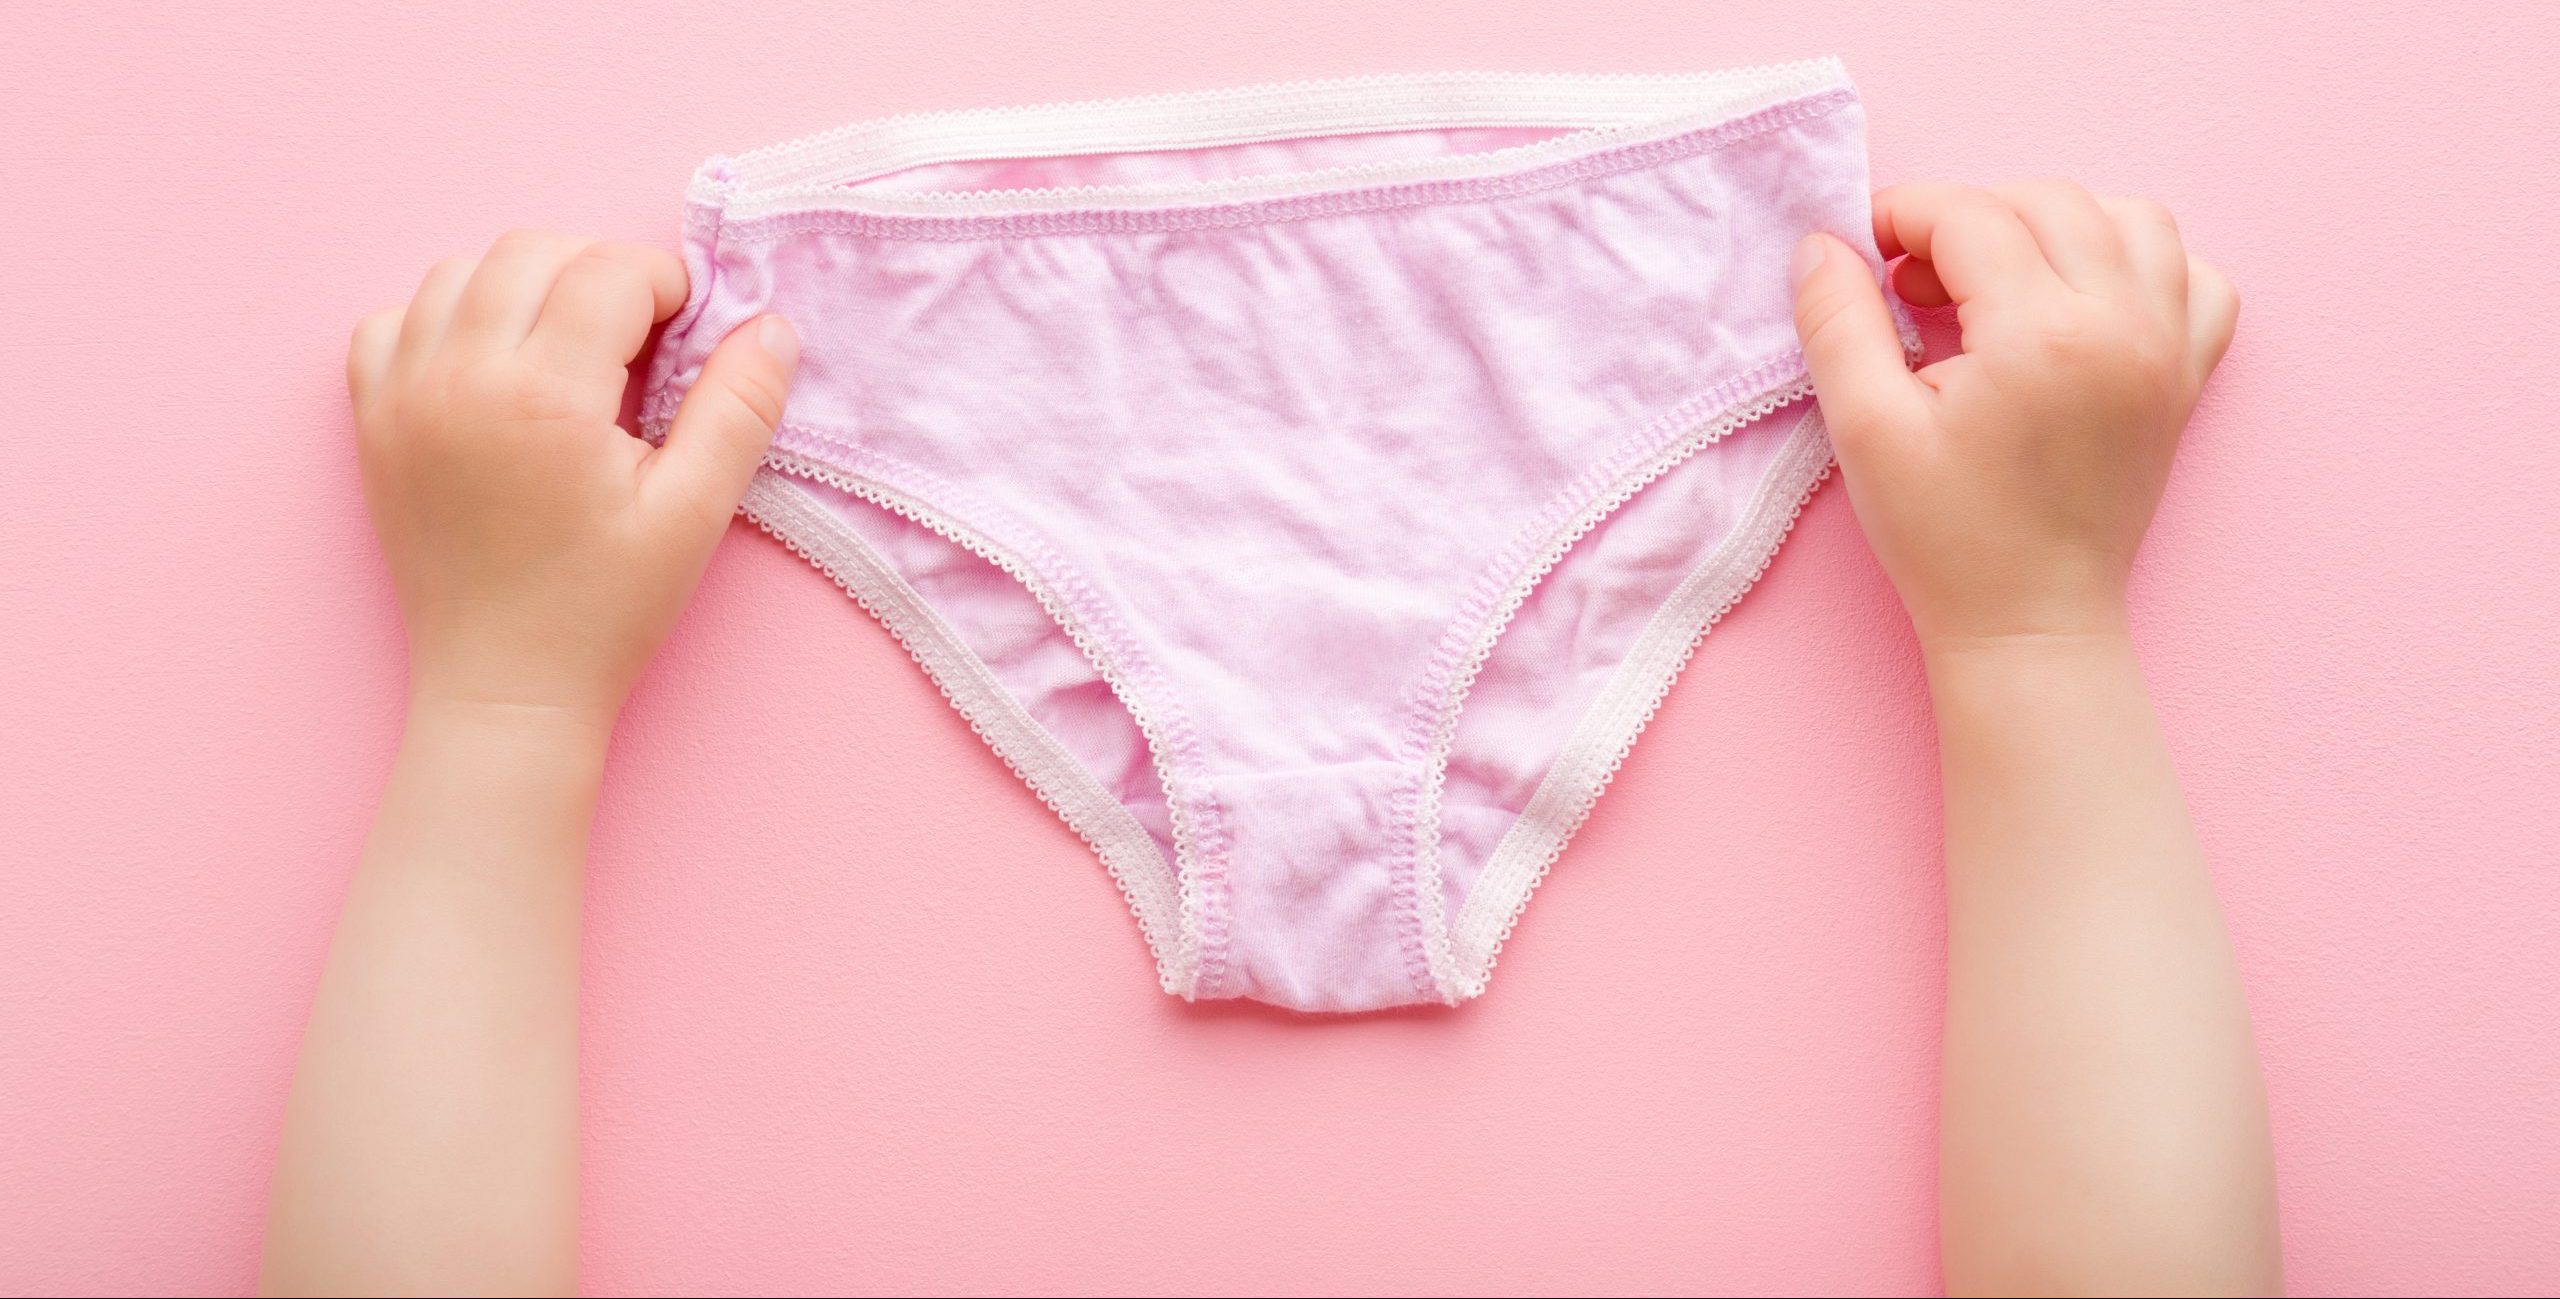 How to Properly Wash Bras and Underwear - How to Laundry PantiesHelloGiggles